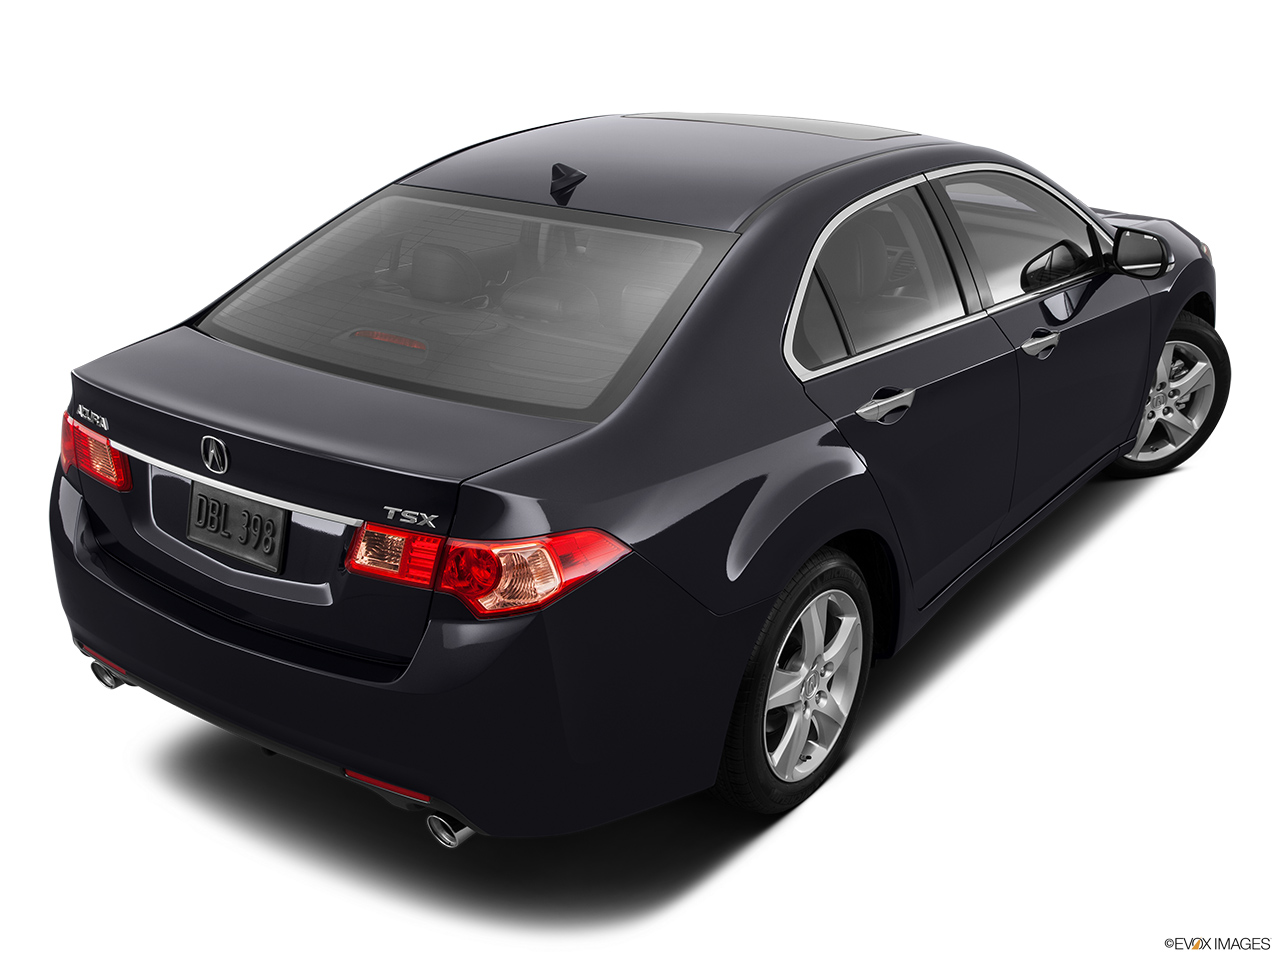 2014 Acura TSX 5-Speed Automatic Rear 3/4 angle view. 